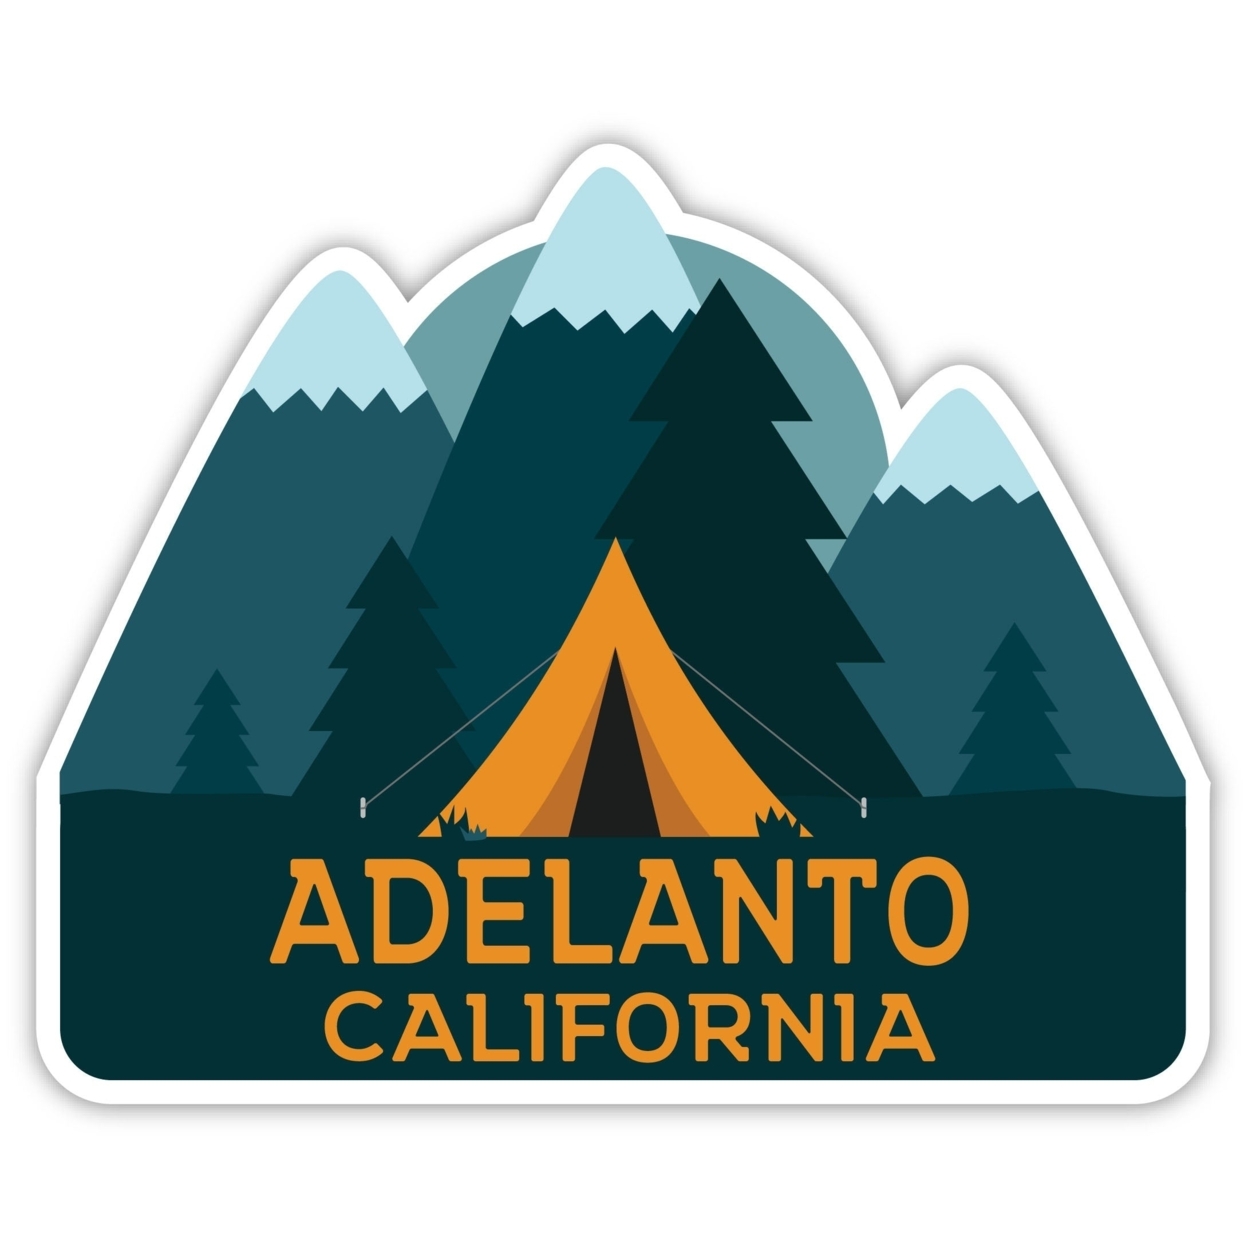 Adelanto California Souvenir Decorative Stickers (Choose Theme And Size) - 4-Pack, 4-Inch, Tent